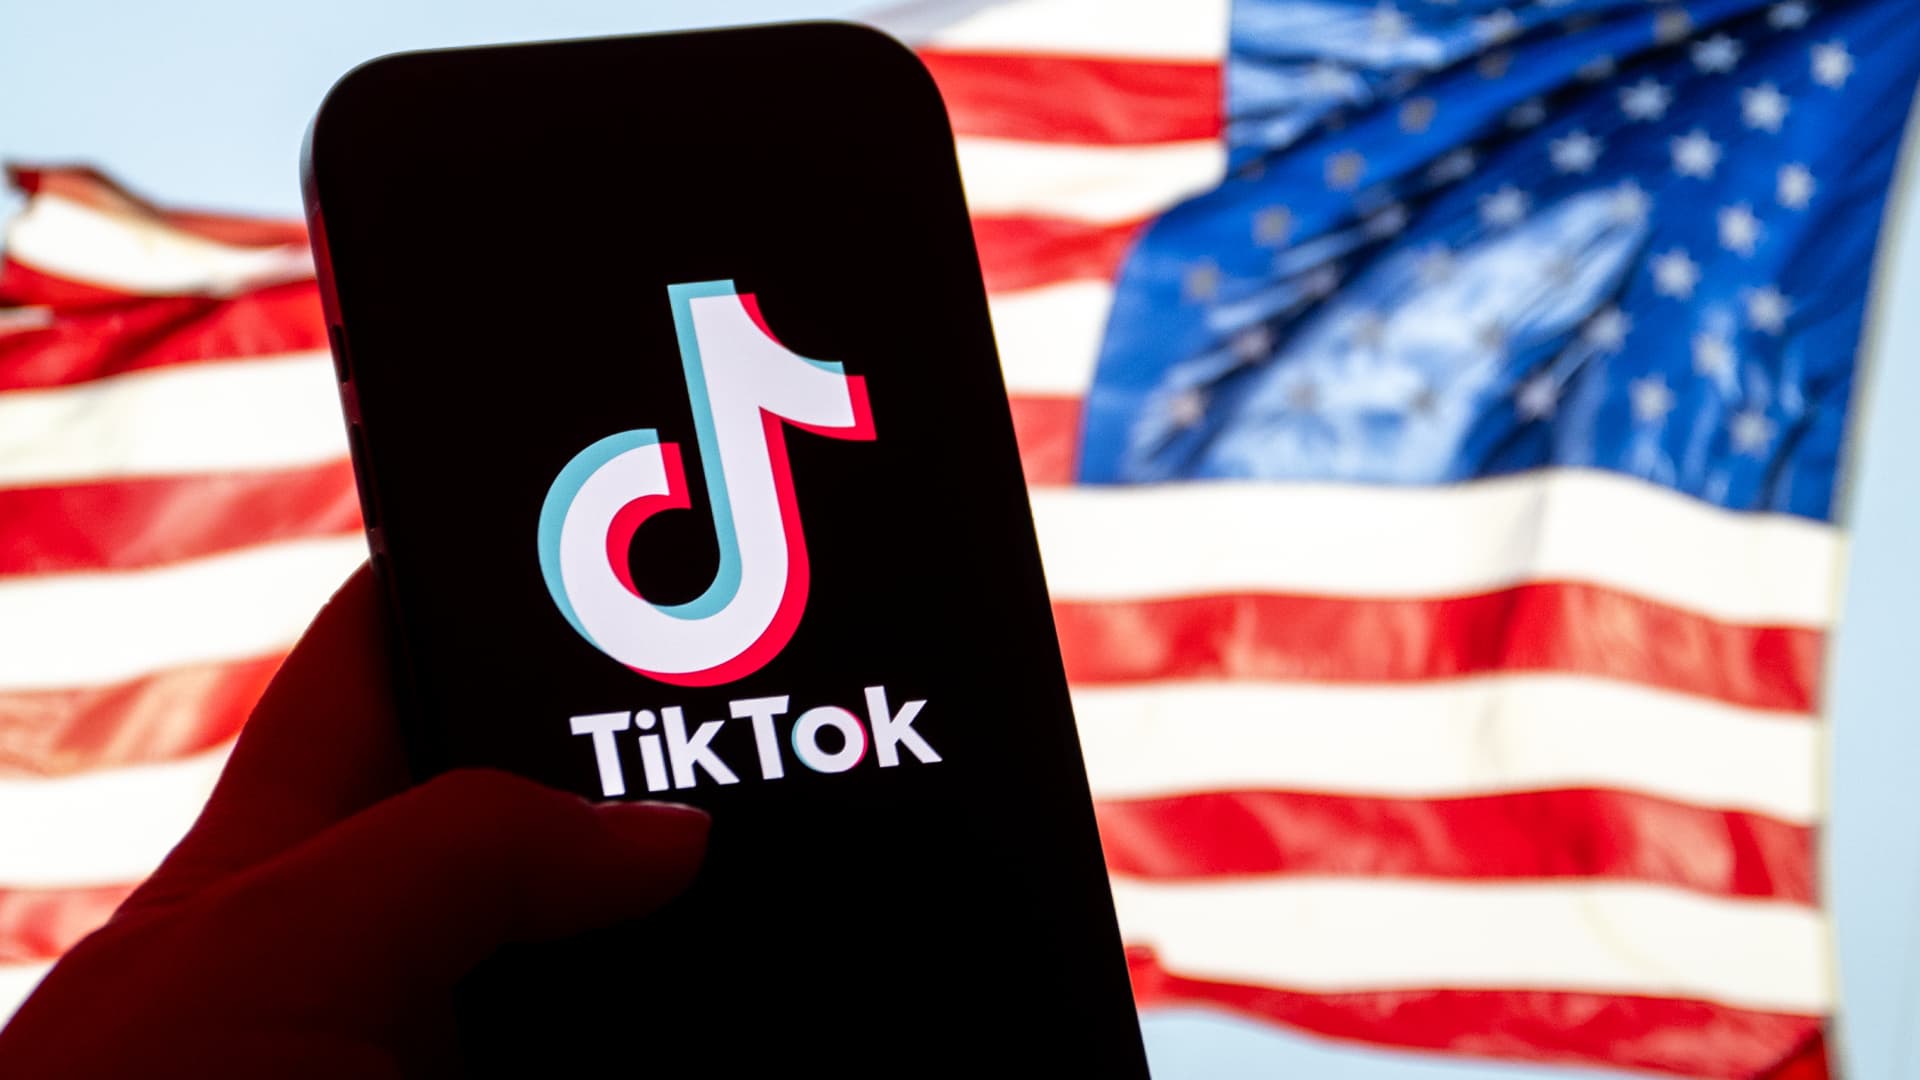 TikTok and its China-based parent company ByteDance combined to spend over $7 million so far this year to try and stop Congress from passing legislati